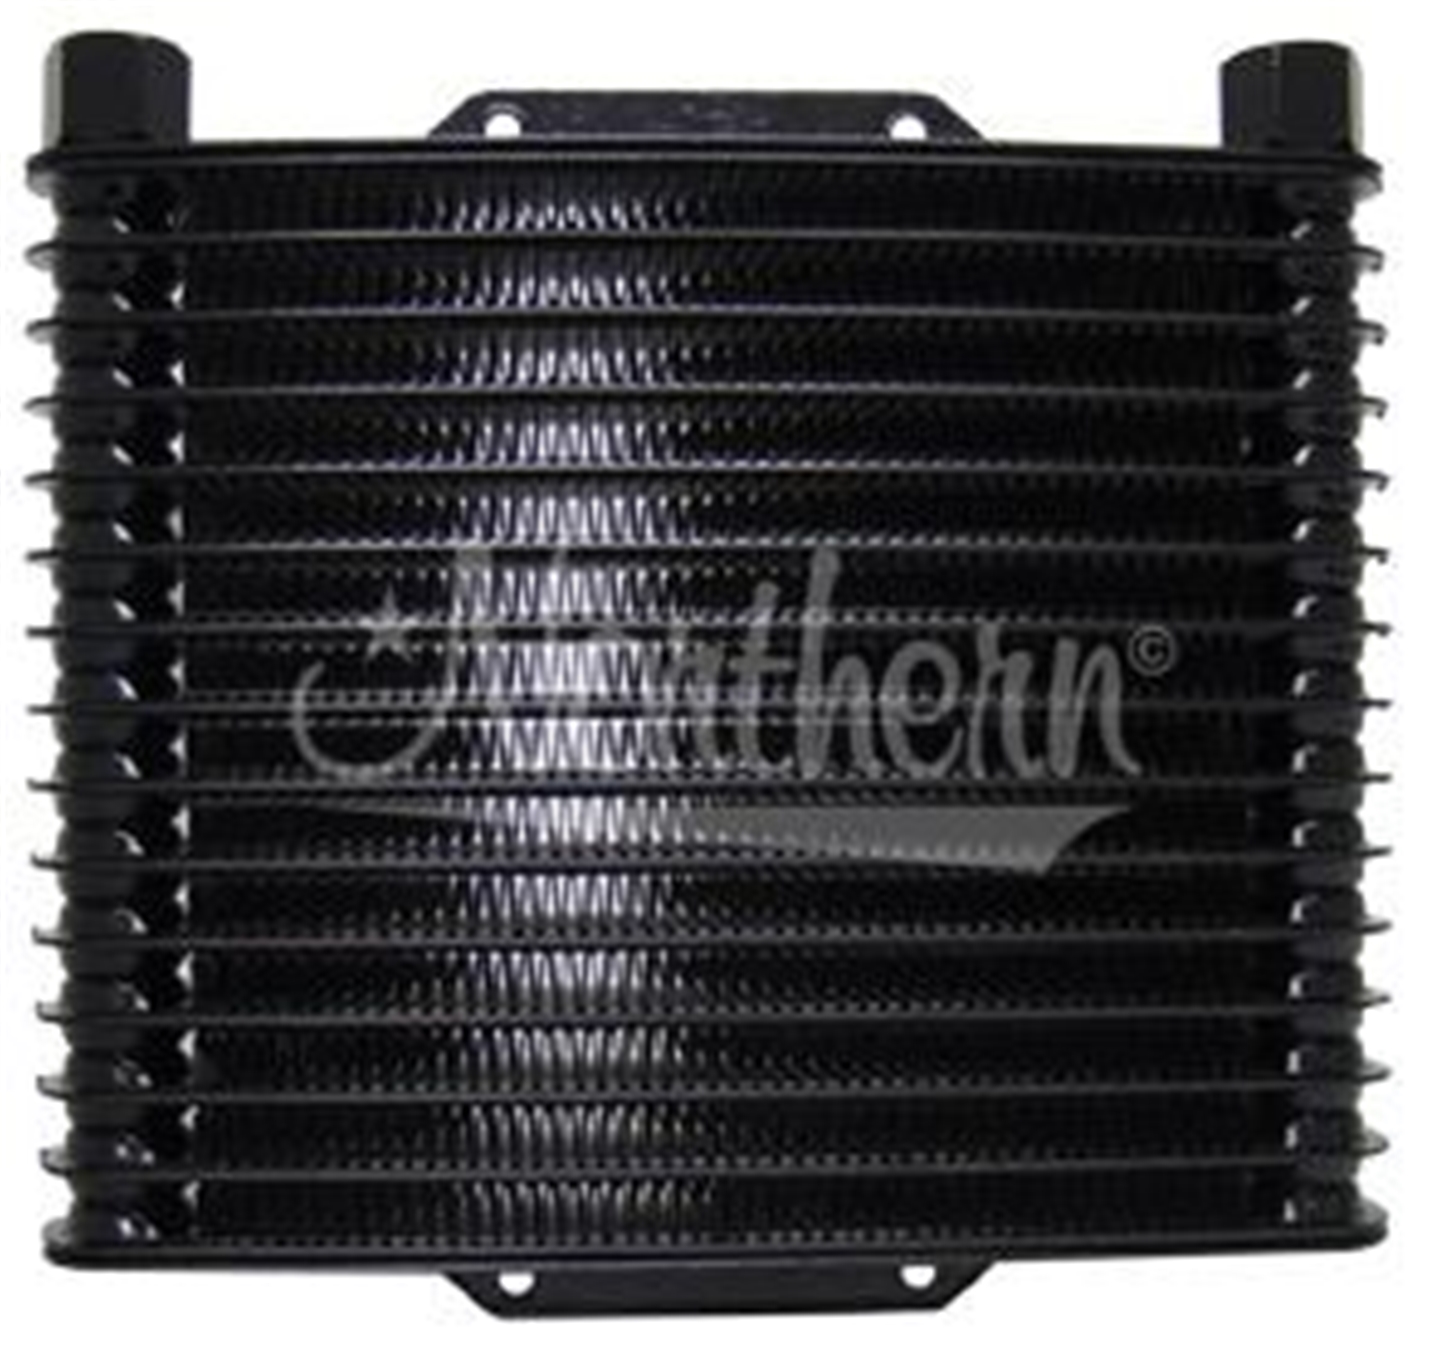 Stacked Plate Oil Cooler (10"x 8"x 1 1/4")